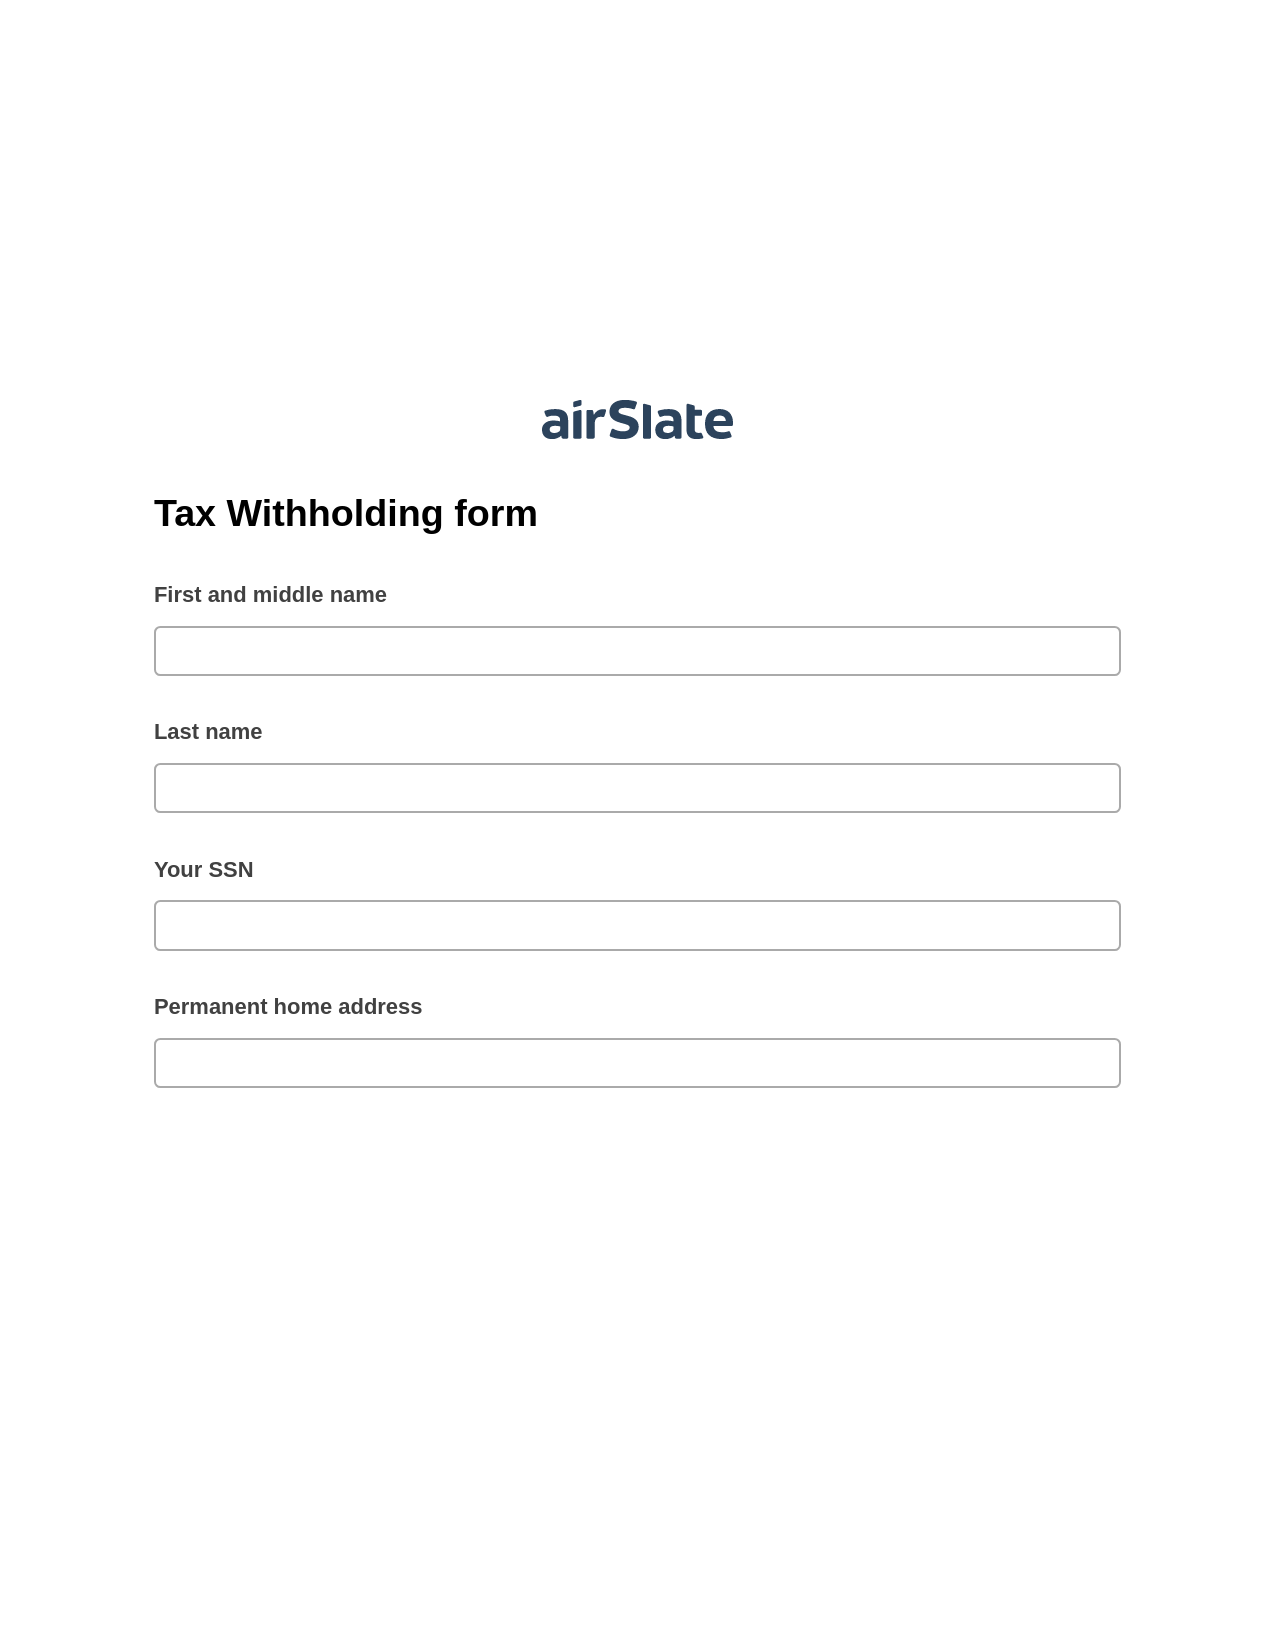 Multirole Tax Withholding form Pre-fill Dropdowns from CSV File Bot, Mailchimp Add Recipient to Audience Bot, Export to Excel 365 Bot